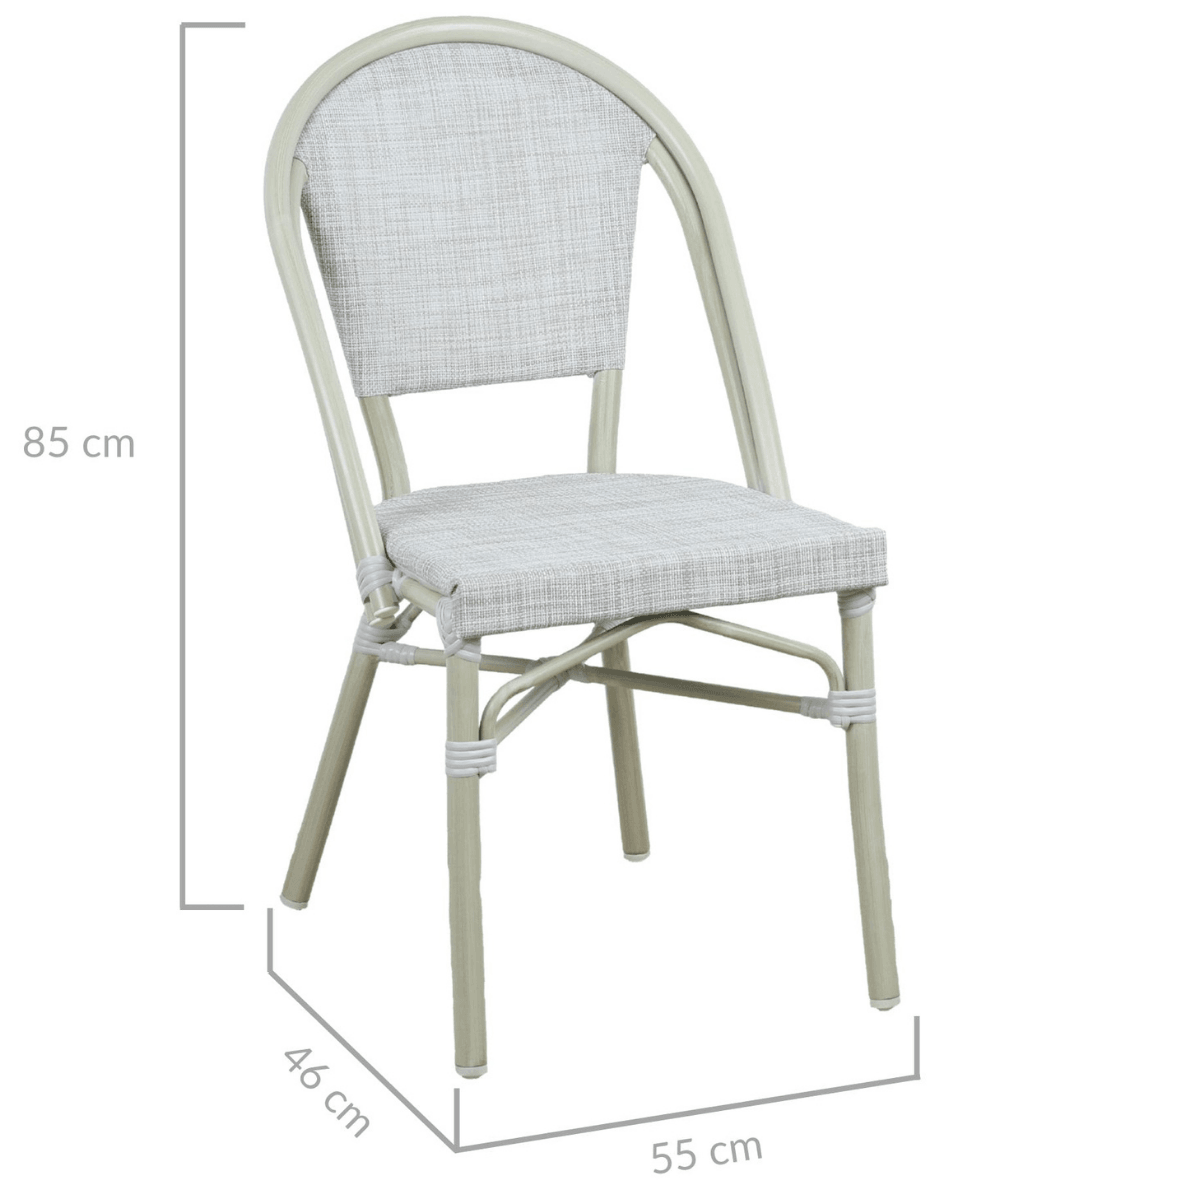 Morris White French Flair Outdoor Dining Chair Set